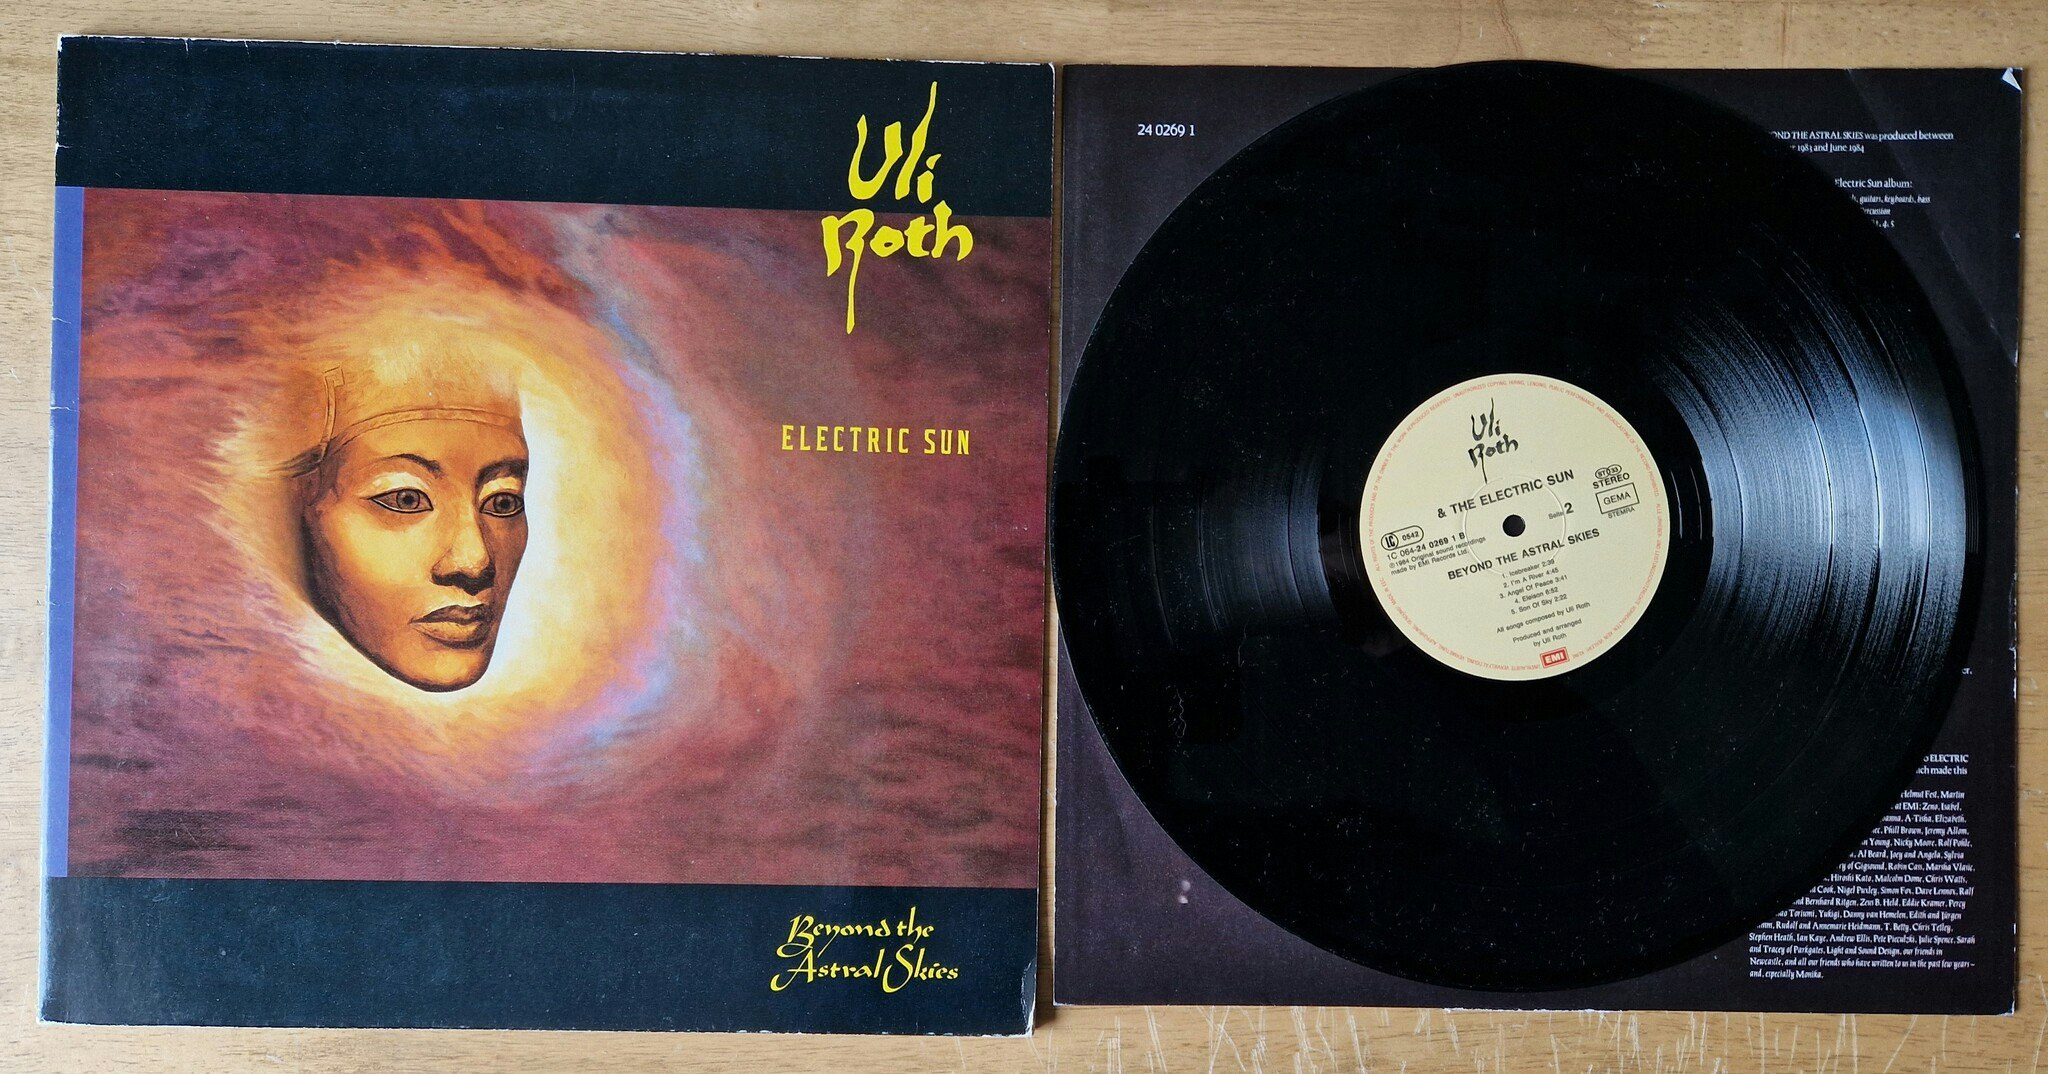 Uli Roth & The Electric Sun, Beyond the astral skies. Vinyl LP